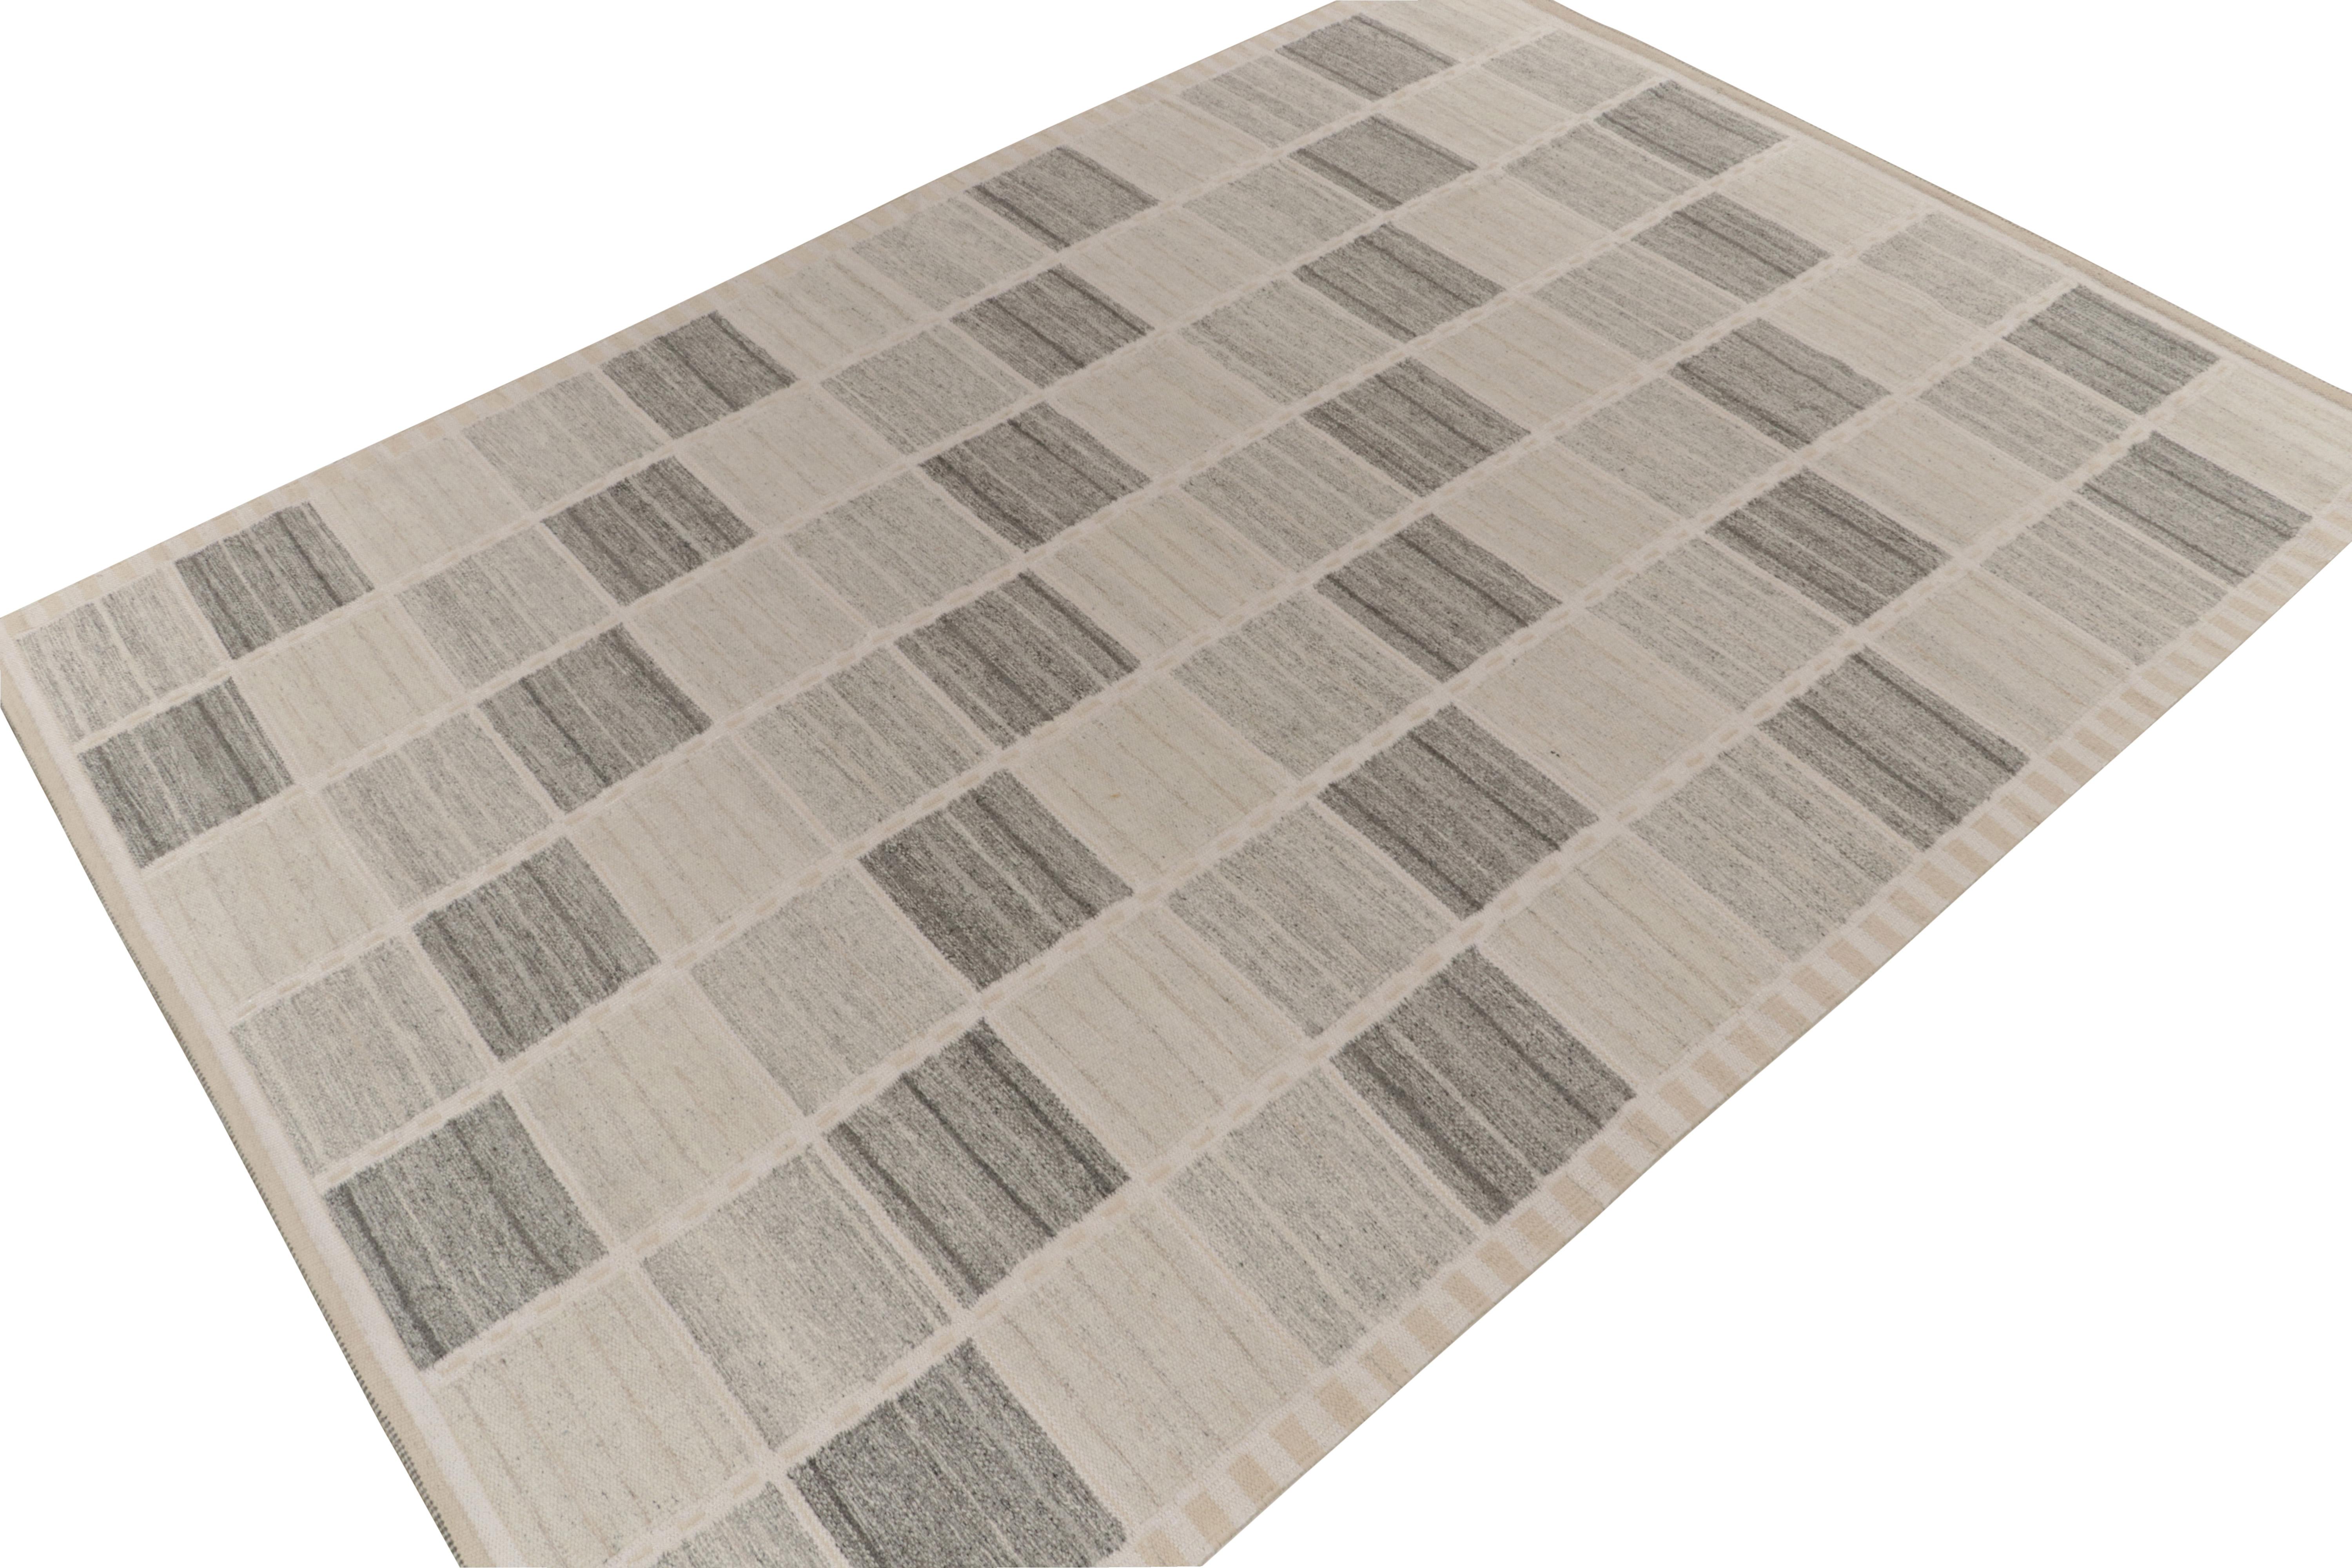 Exemplifying a modern take on Swedish Deco styles, a 10x14 flat weave from Rug & Kilim’s award-winning Scandinavian Kilim collection. 

On the Design: The handwoven wool rug enjoys compartmentalisation in gray and white tones—alternating diagonally